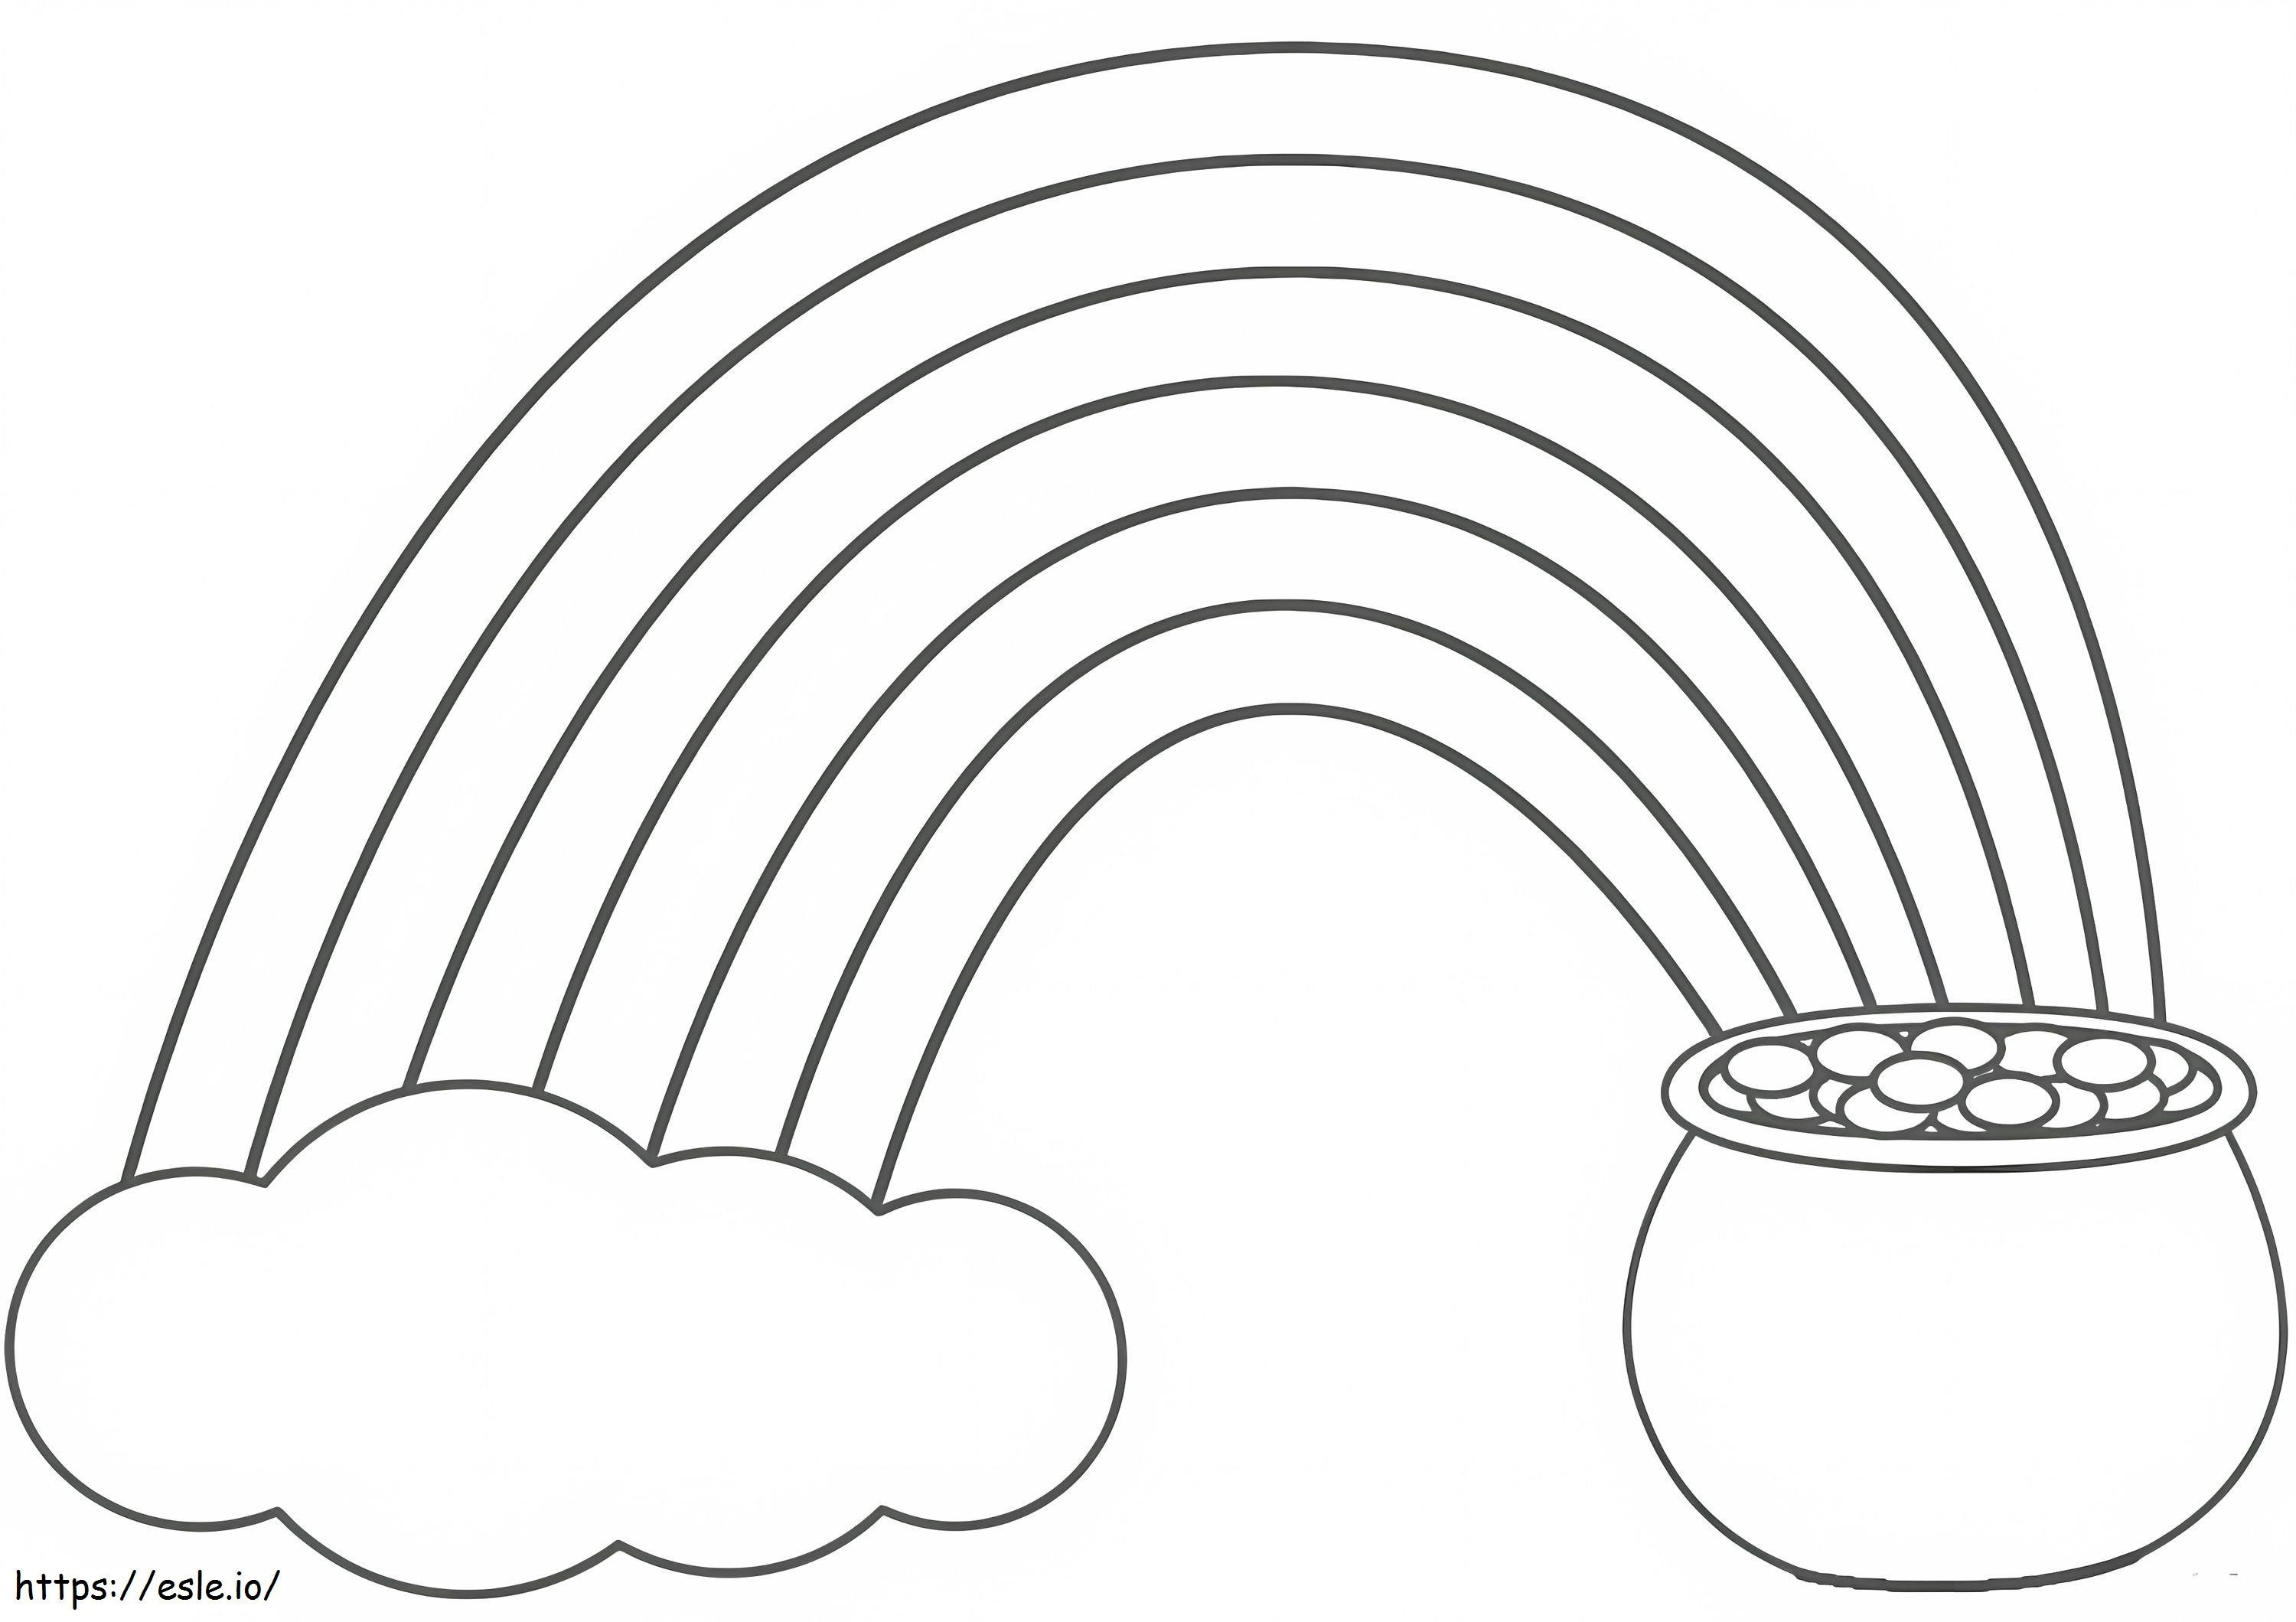 Pot Of Gold 3 coloring page